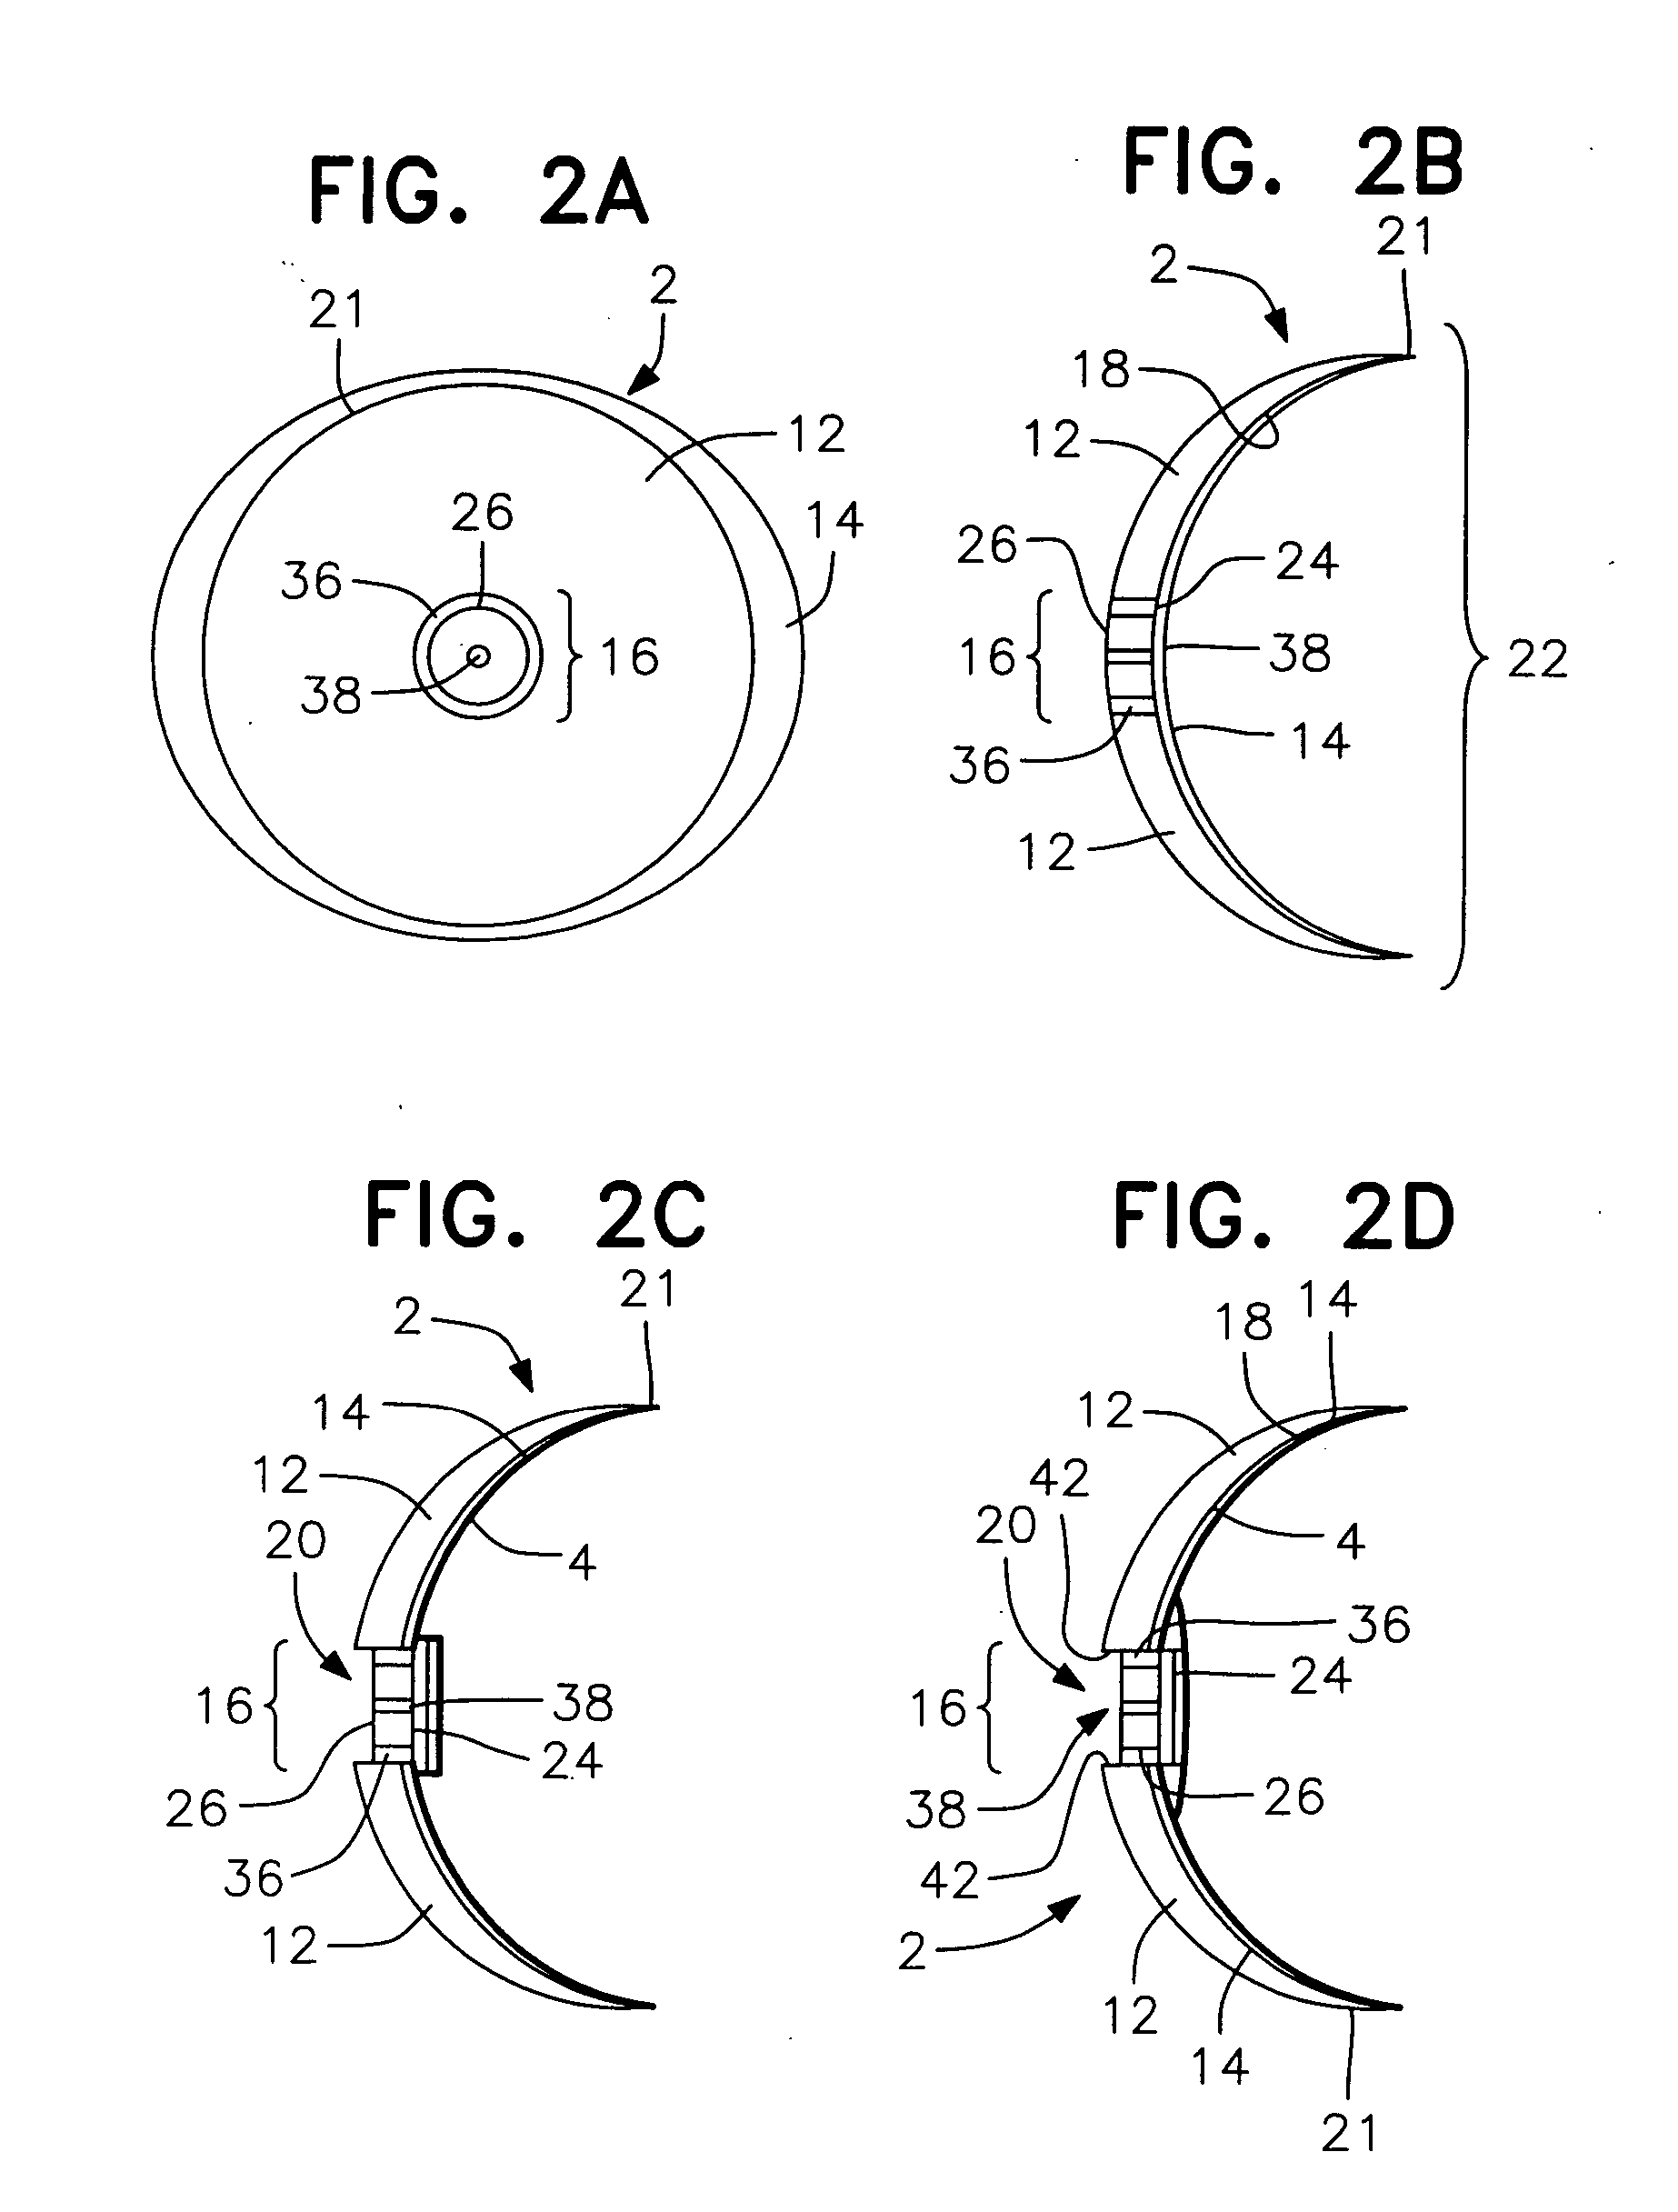 Contact lens for collecting tears and detecting analytes for determining health status, ovulation detection, and diabetes screening